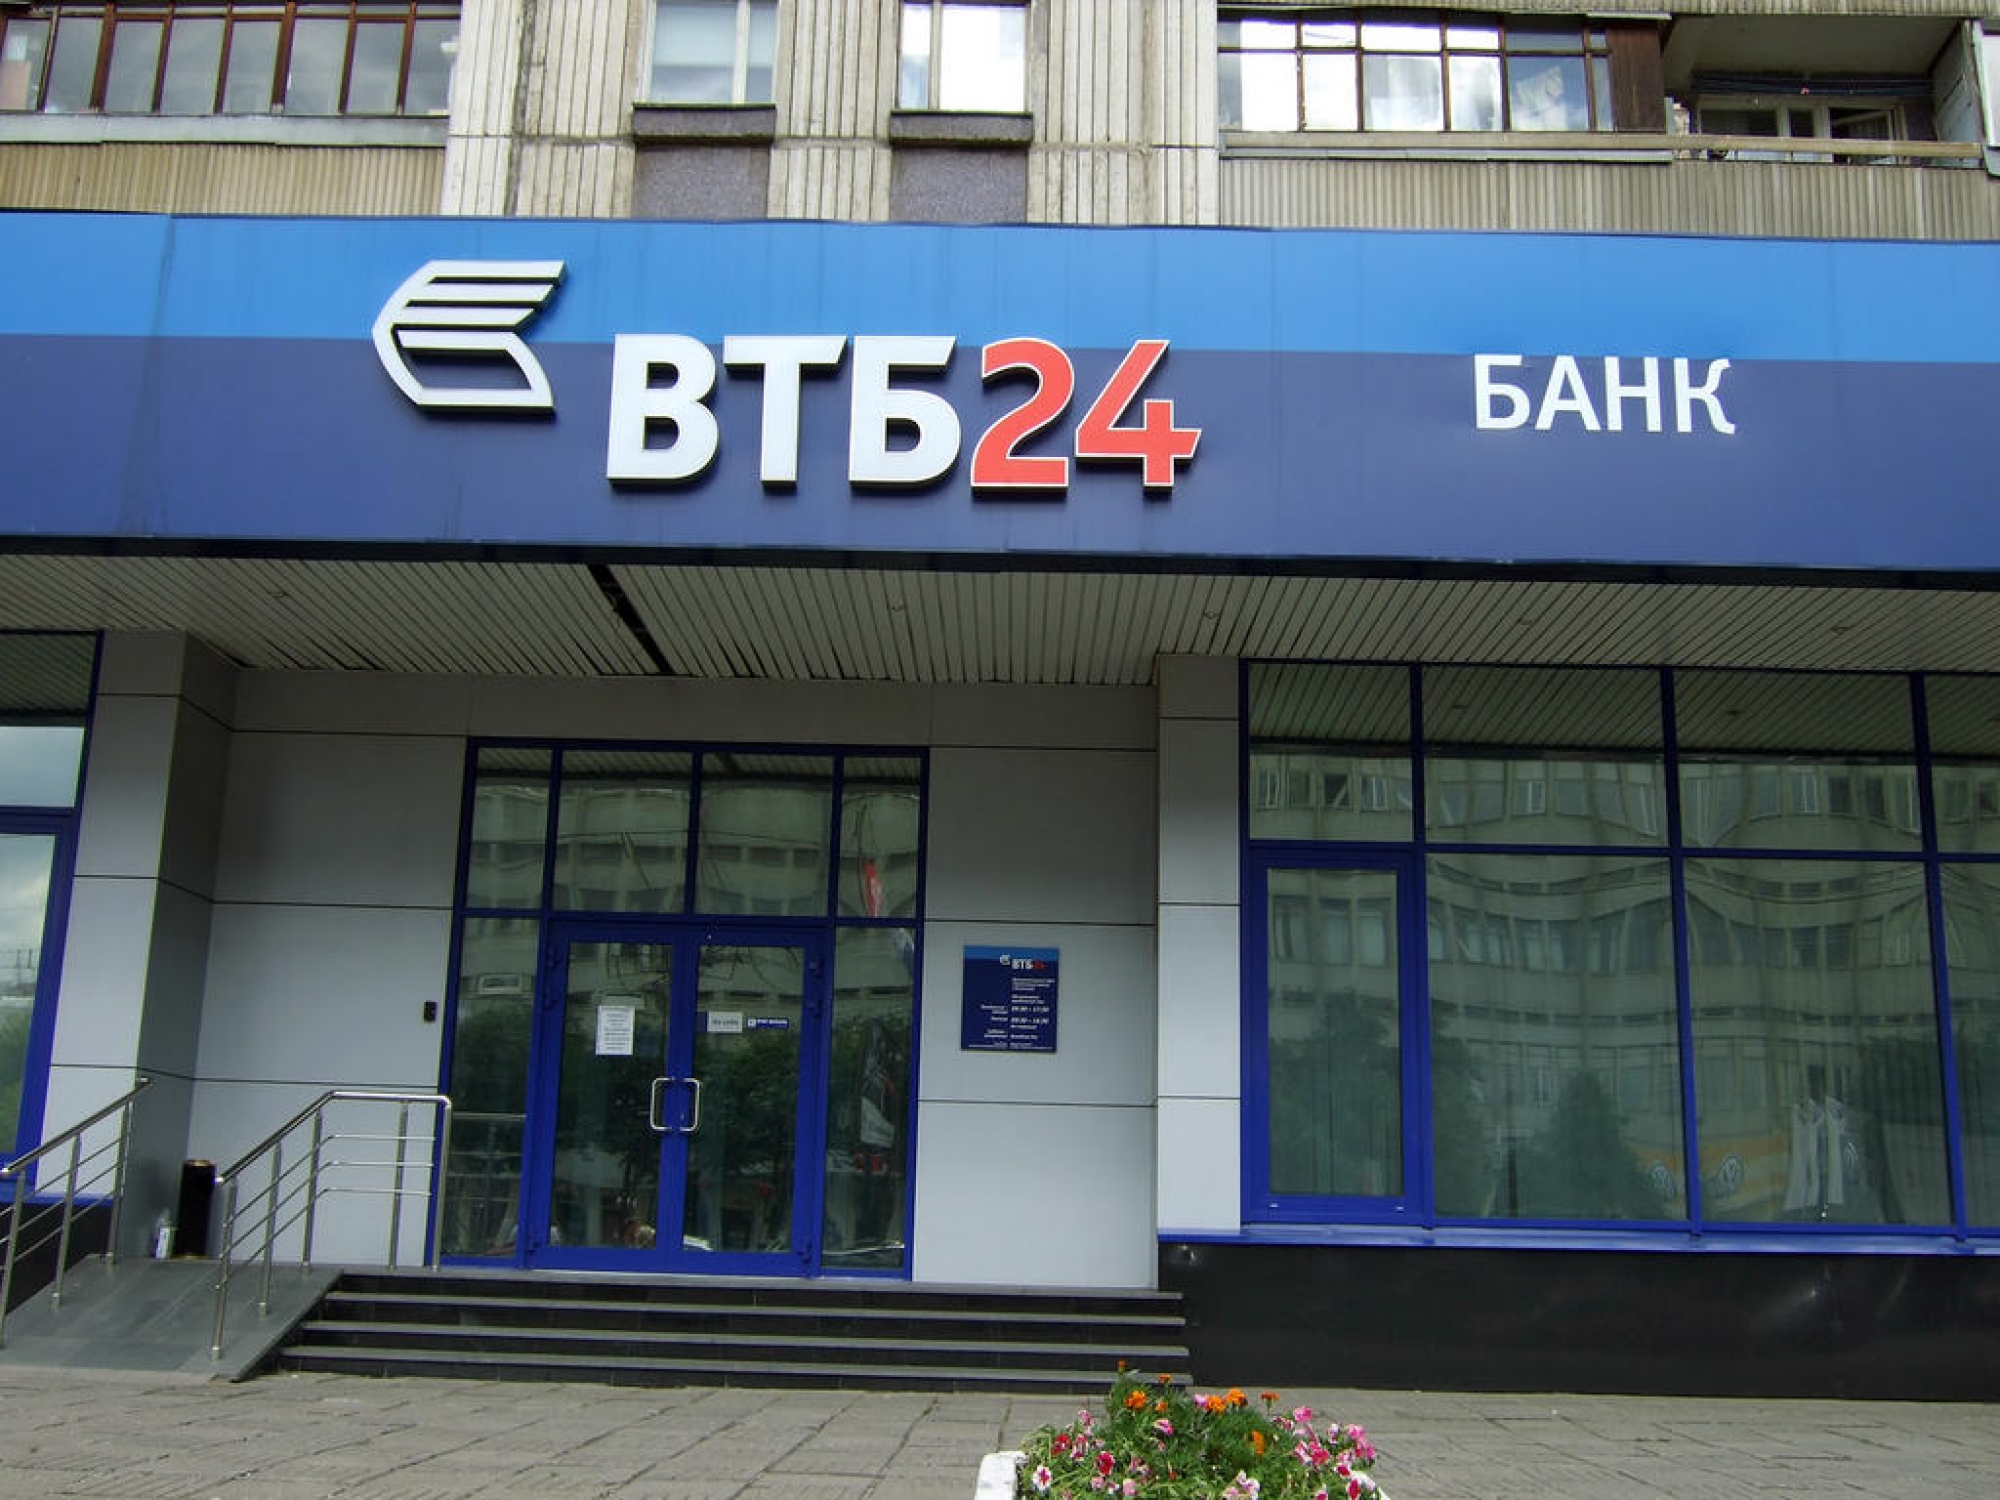 VTB 24 BANK ACCREDITED A PART OF BUILDINGS IN THE GREATER DOMODEDOVO RESIDENTIAL AREA